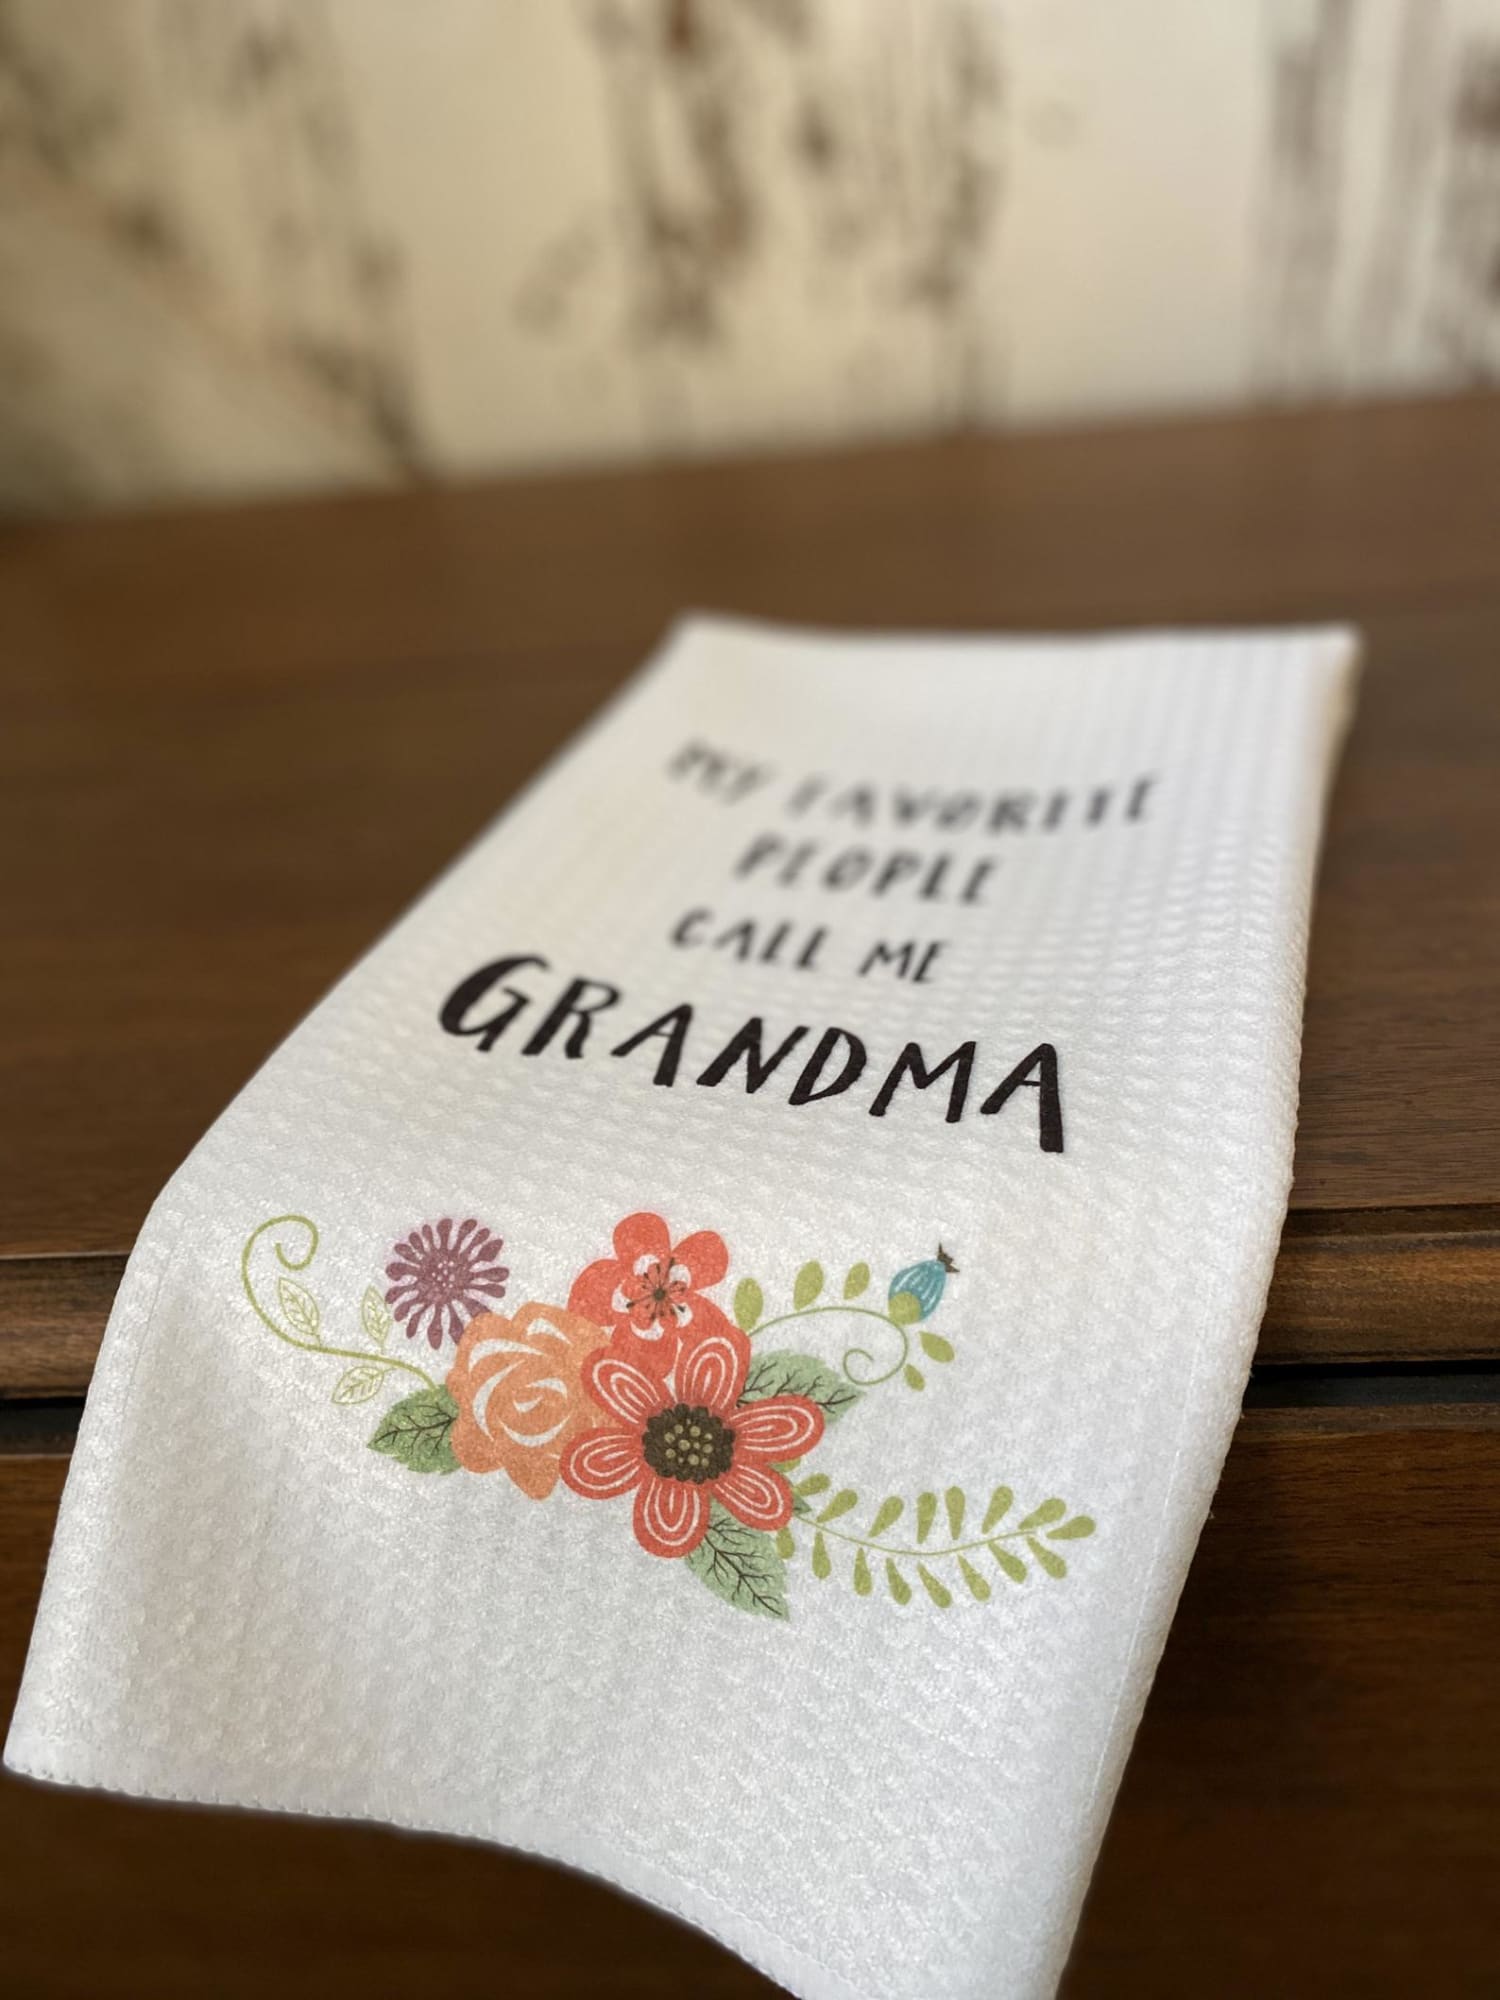 Best Mother Ever - Embroidered Kitchen Towel - Embroidery Decorative Towel  - Housewarming Gift - Hostess Gift - Mom Stepmom 